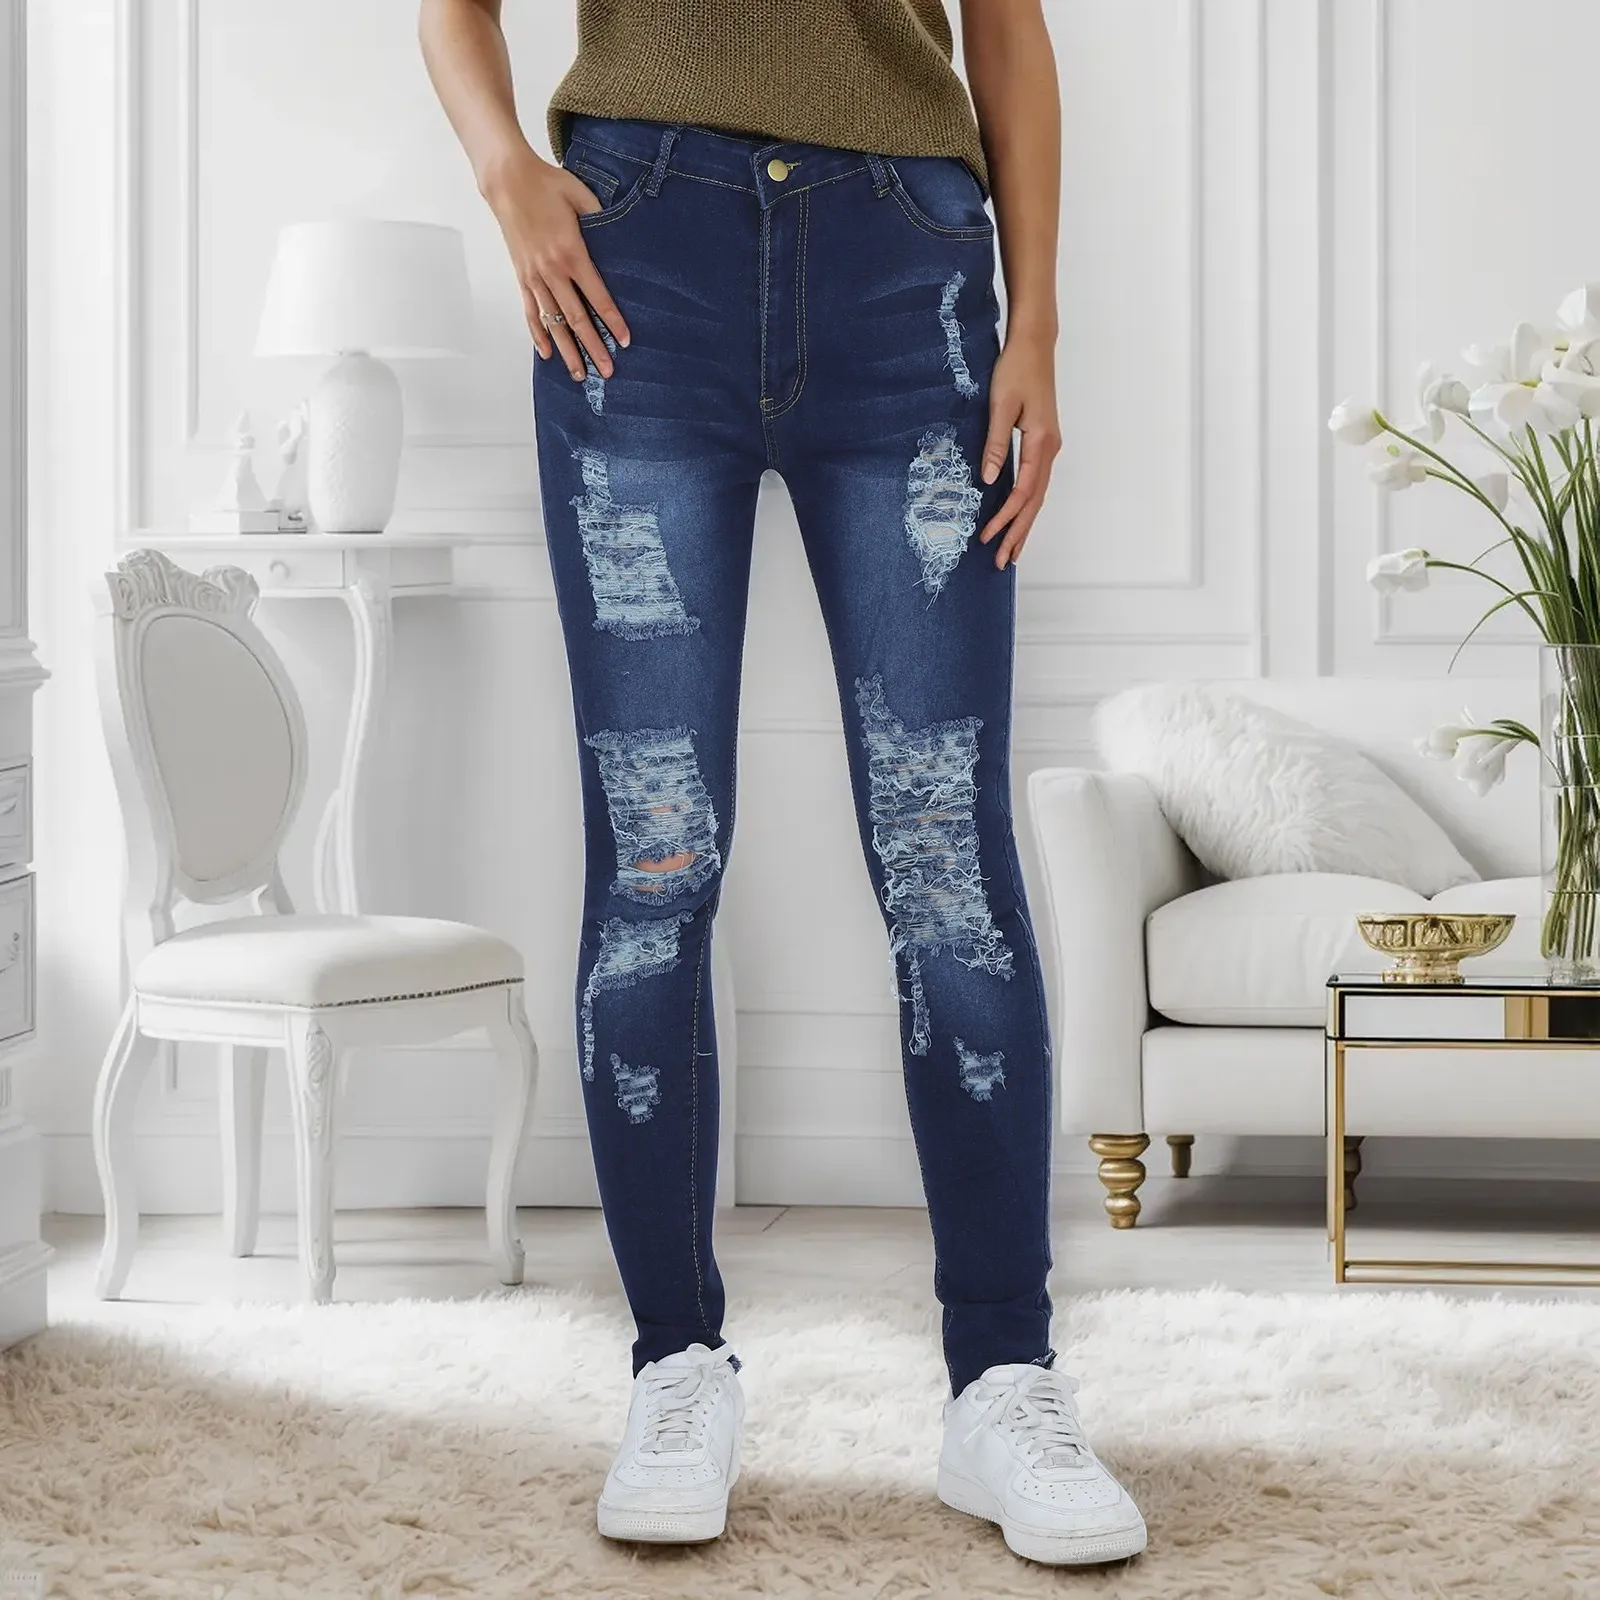 

Stretchy Women's Distressed High Waist Jeans Pants Slimming Destroyed Jeans Butt Lifting Jean Ripped Denim Plus Size Pants